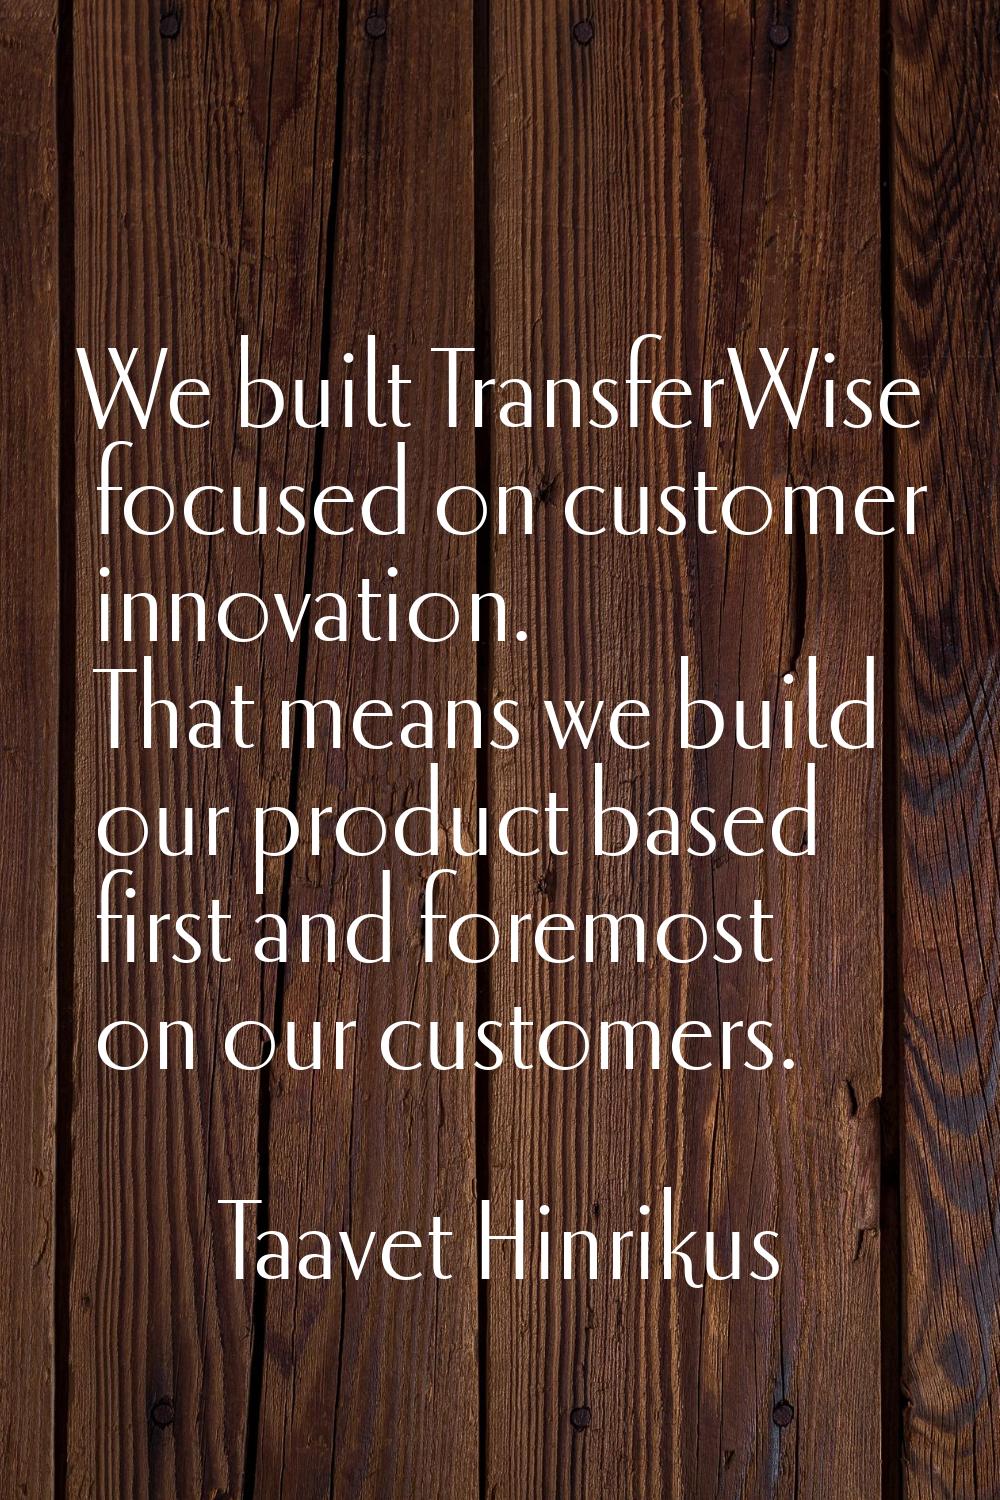 We built TransferWise focused on customer innovation. That means we build our product based first a